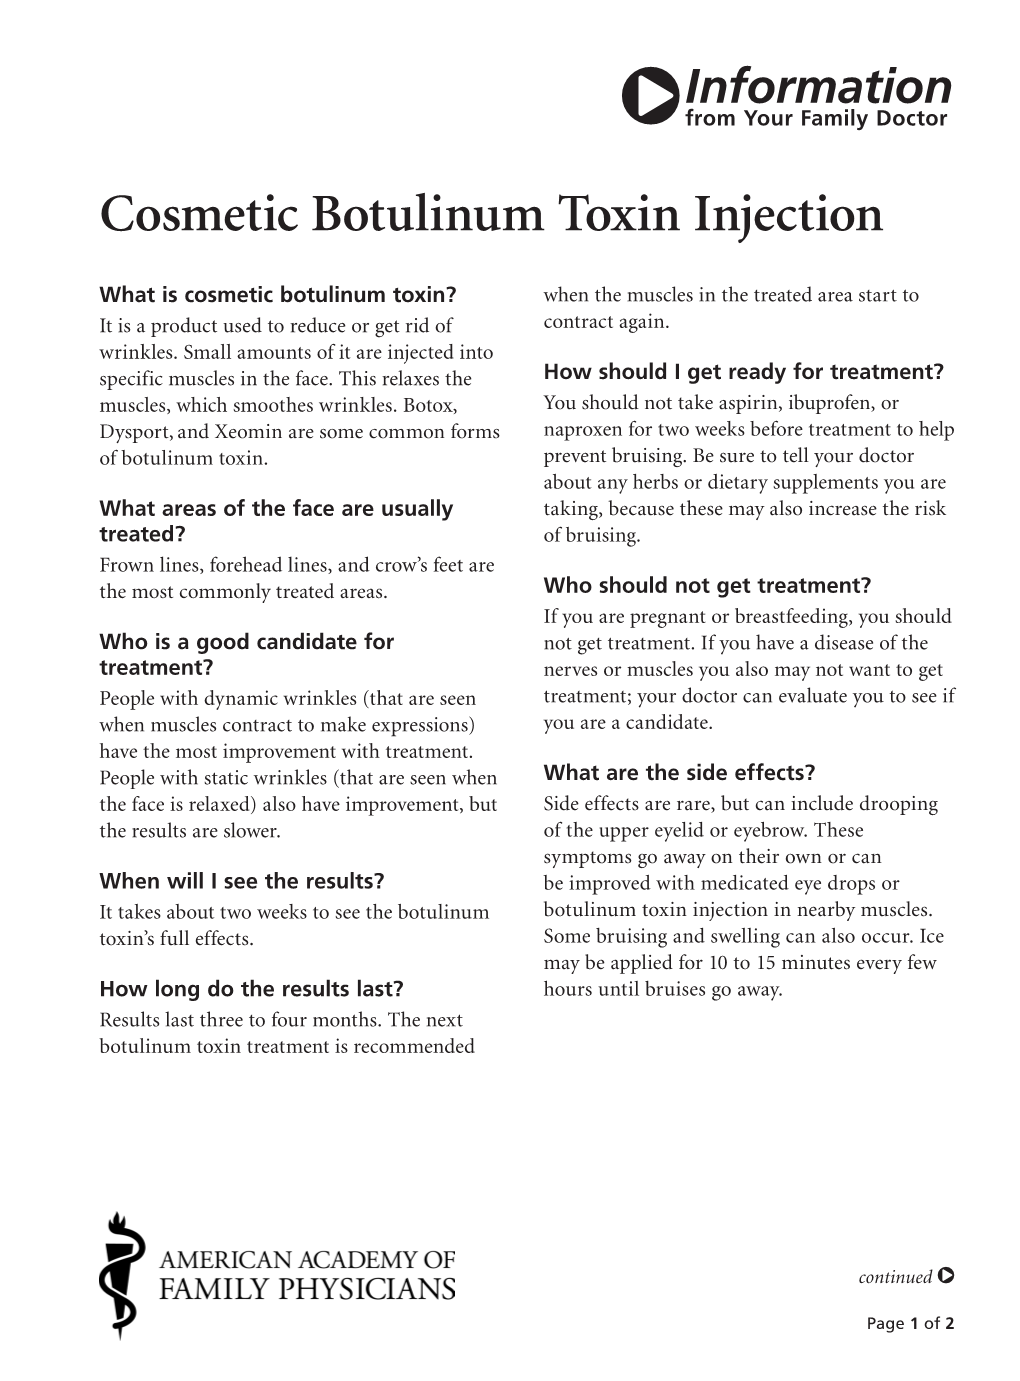 Cosmetic Botulinum Toxin Injection